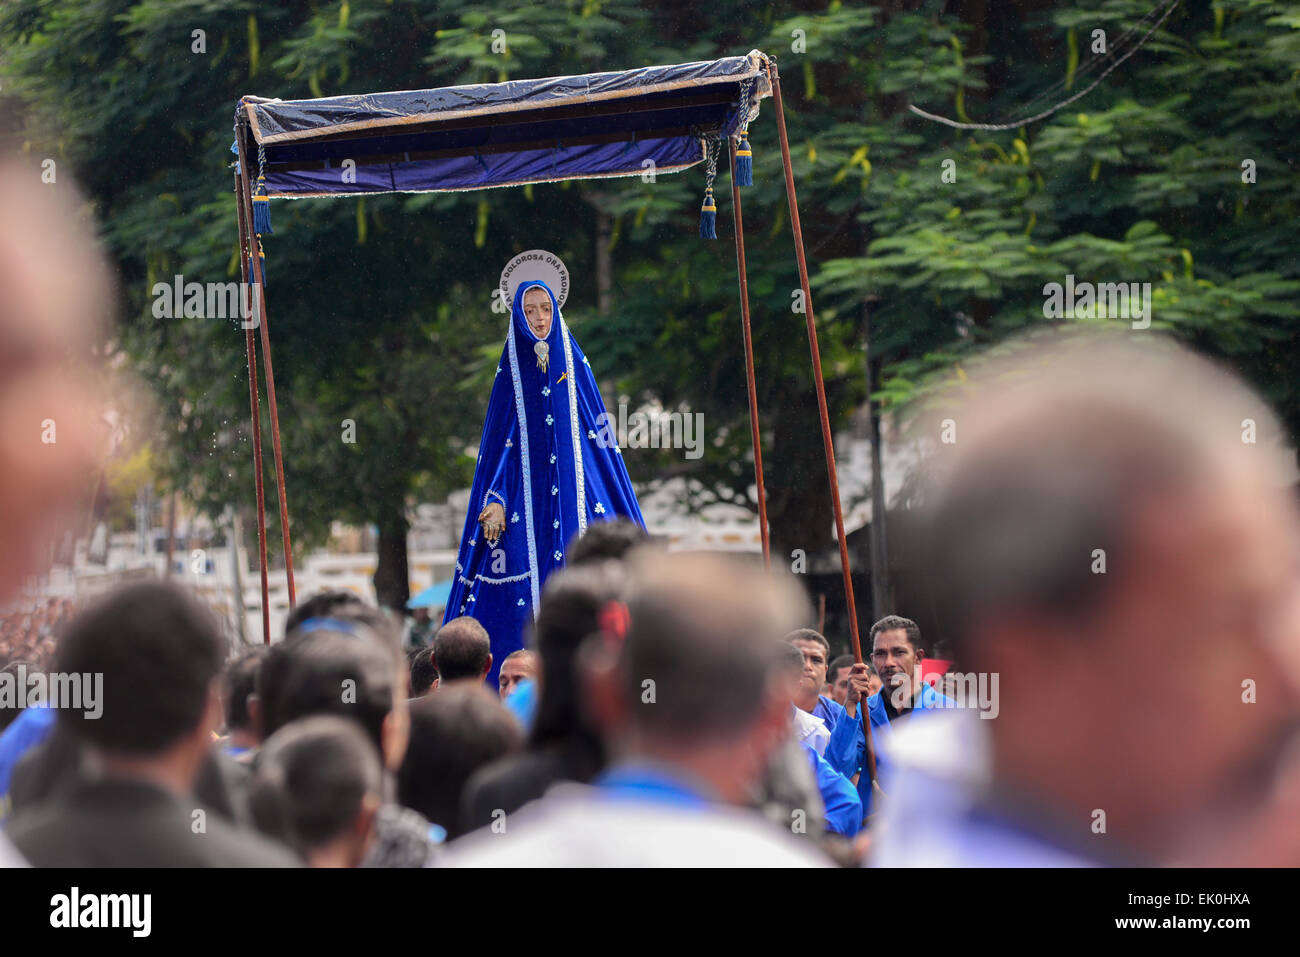 Larantuka, Indonesia. 3rd April, 2015. People march to haul an old Mother Mary statue to Cathedral Church of Larantuka, Flores Island, Indonesia. Thousands of people, including those from other cities and countries, attend a whole week ceremonies to celebrate Holy Week in the small town of Larantuka, one of the most influential cities in Indonesia in terms of Roman Catholic traditions. Strongly influenced by the Portuguese since the 16 century, Catholic rituals in Larantuka have grown in smooth acculturation with local cultures. Stock Photo